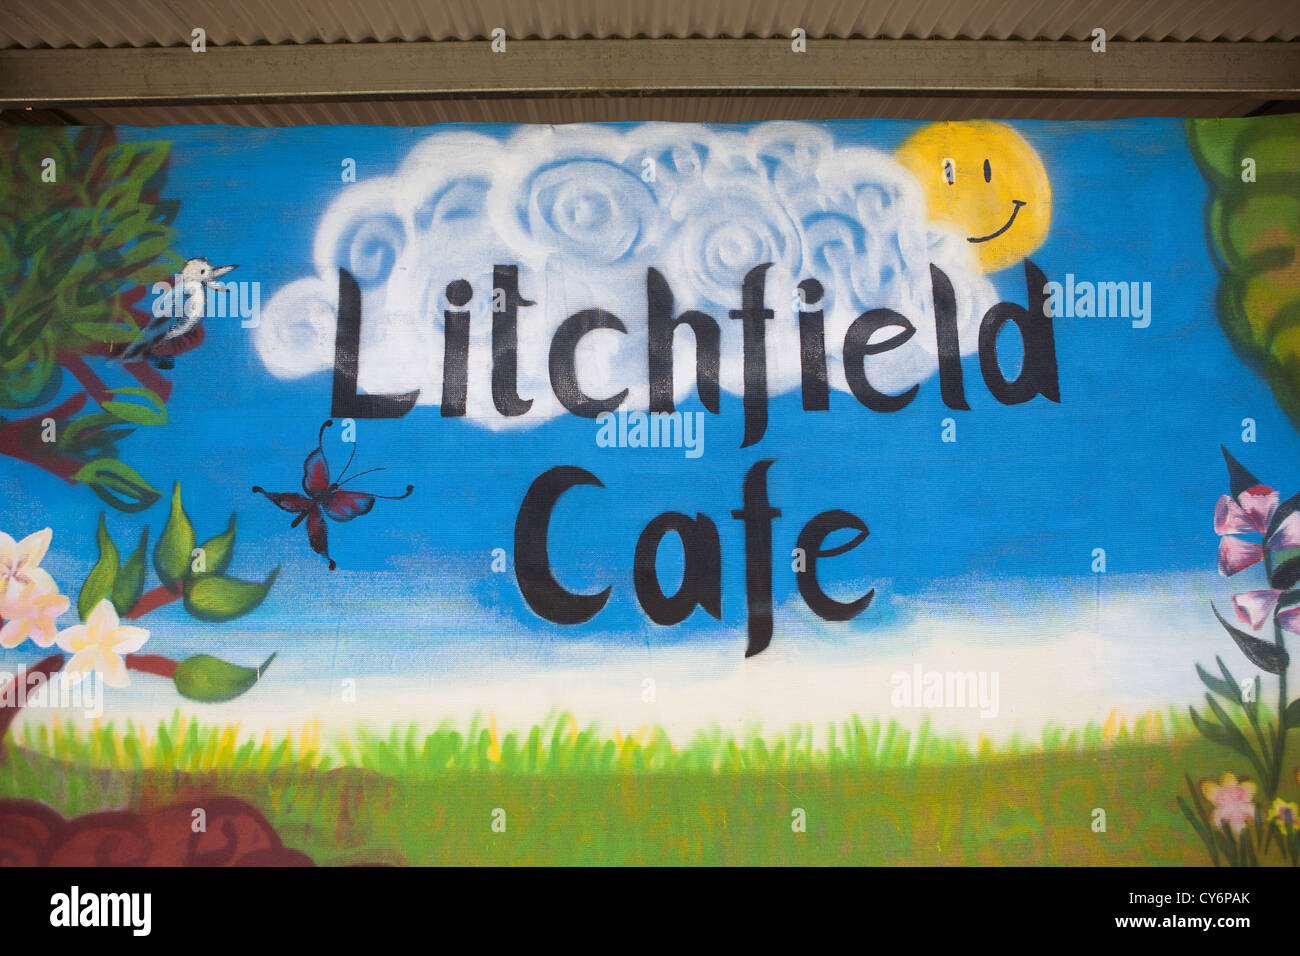 Litchfield cafe sign in Litchfield National Park, Northern Territory, Australia. Stock Photo